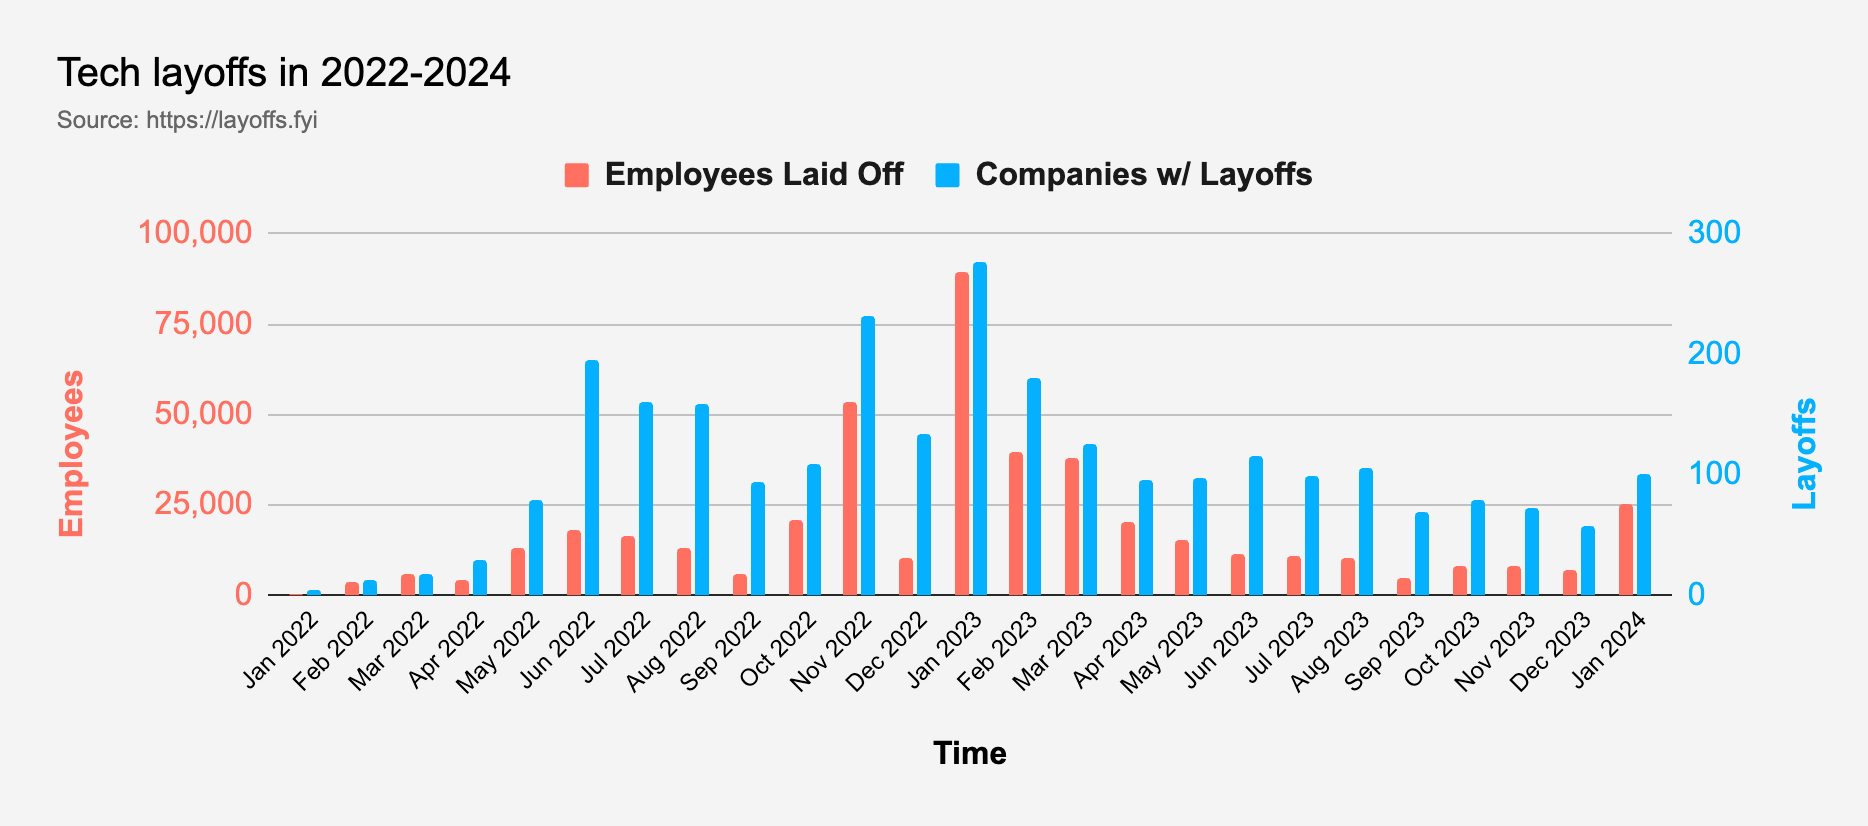 A graph from layoffs.fyi showing the employees laid off and companies with layoffs since January 2022. It's a flat bell-curve, with the largest spikes from November 2022 - January 2023.